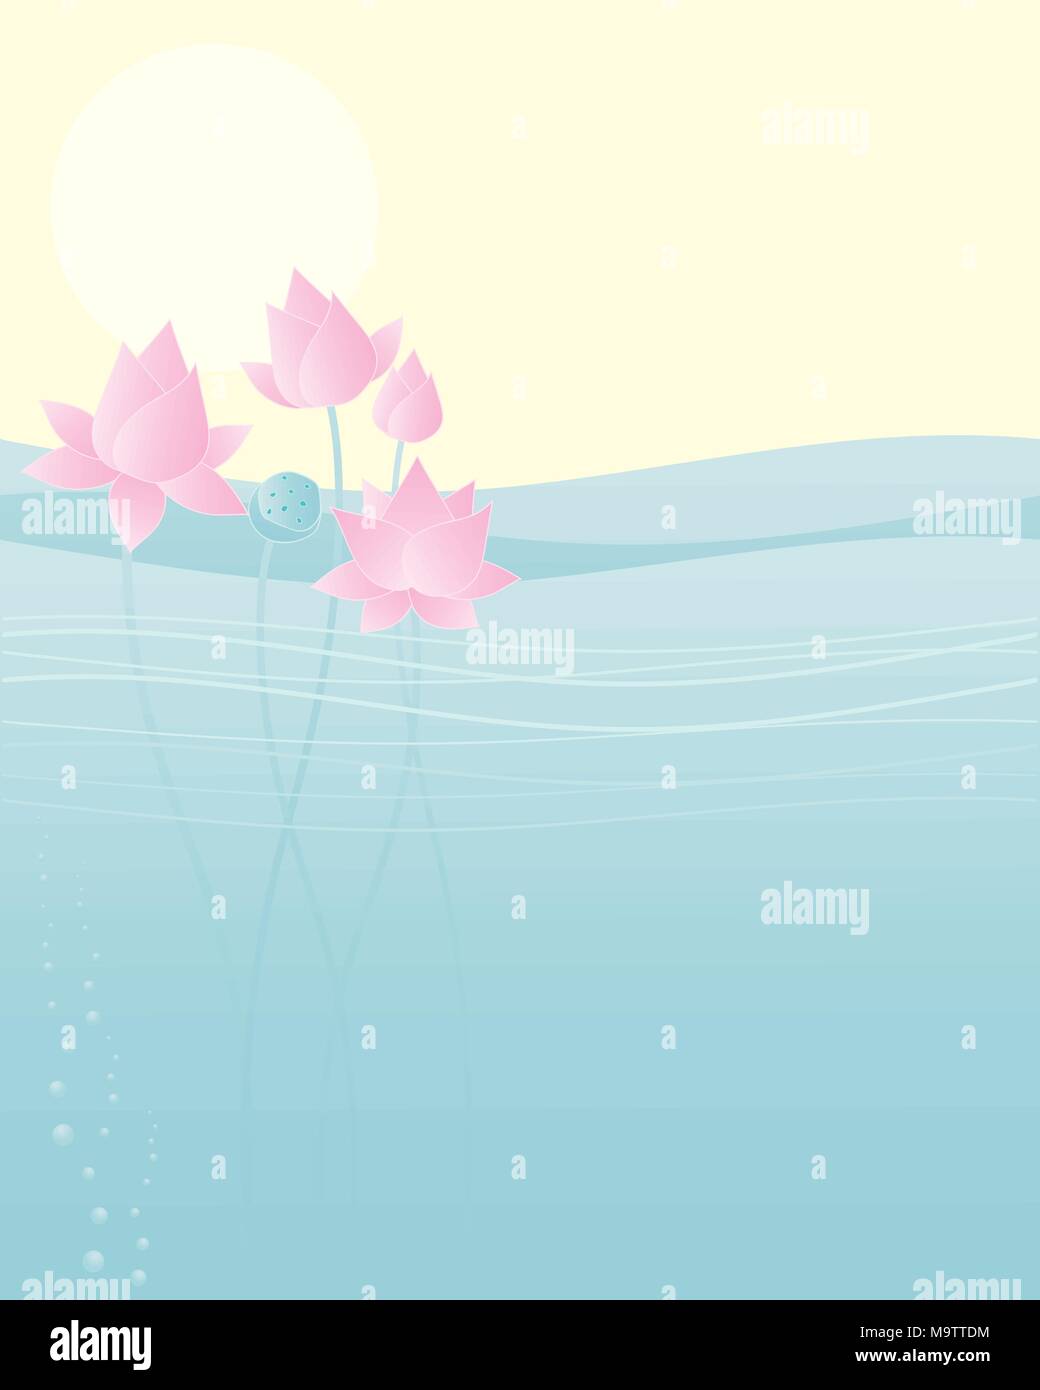 a vector illustration in eps 10 format of lotus blooms in water with seed head and buds under a yellow sun and sky with space for text Stock Vector